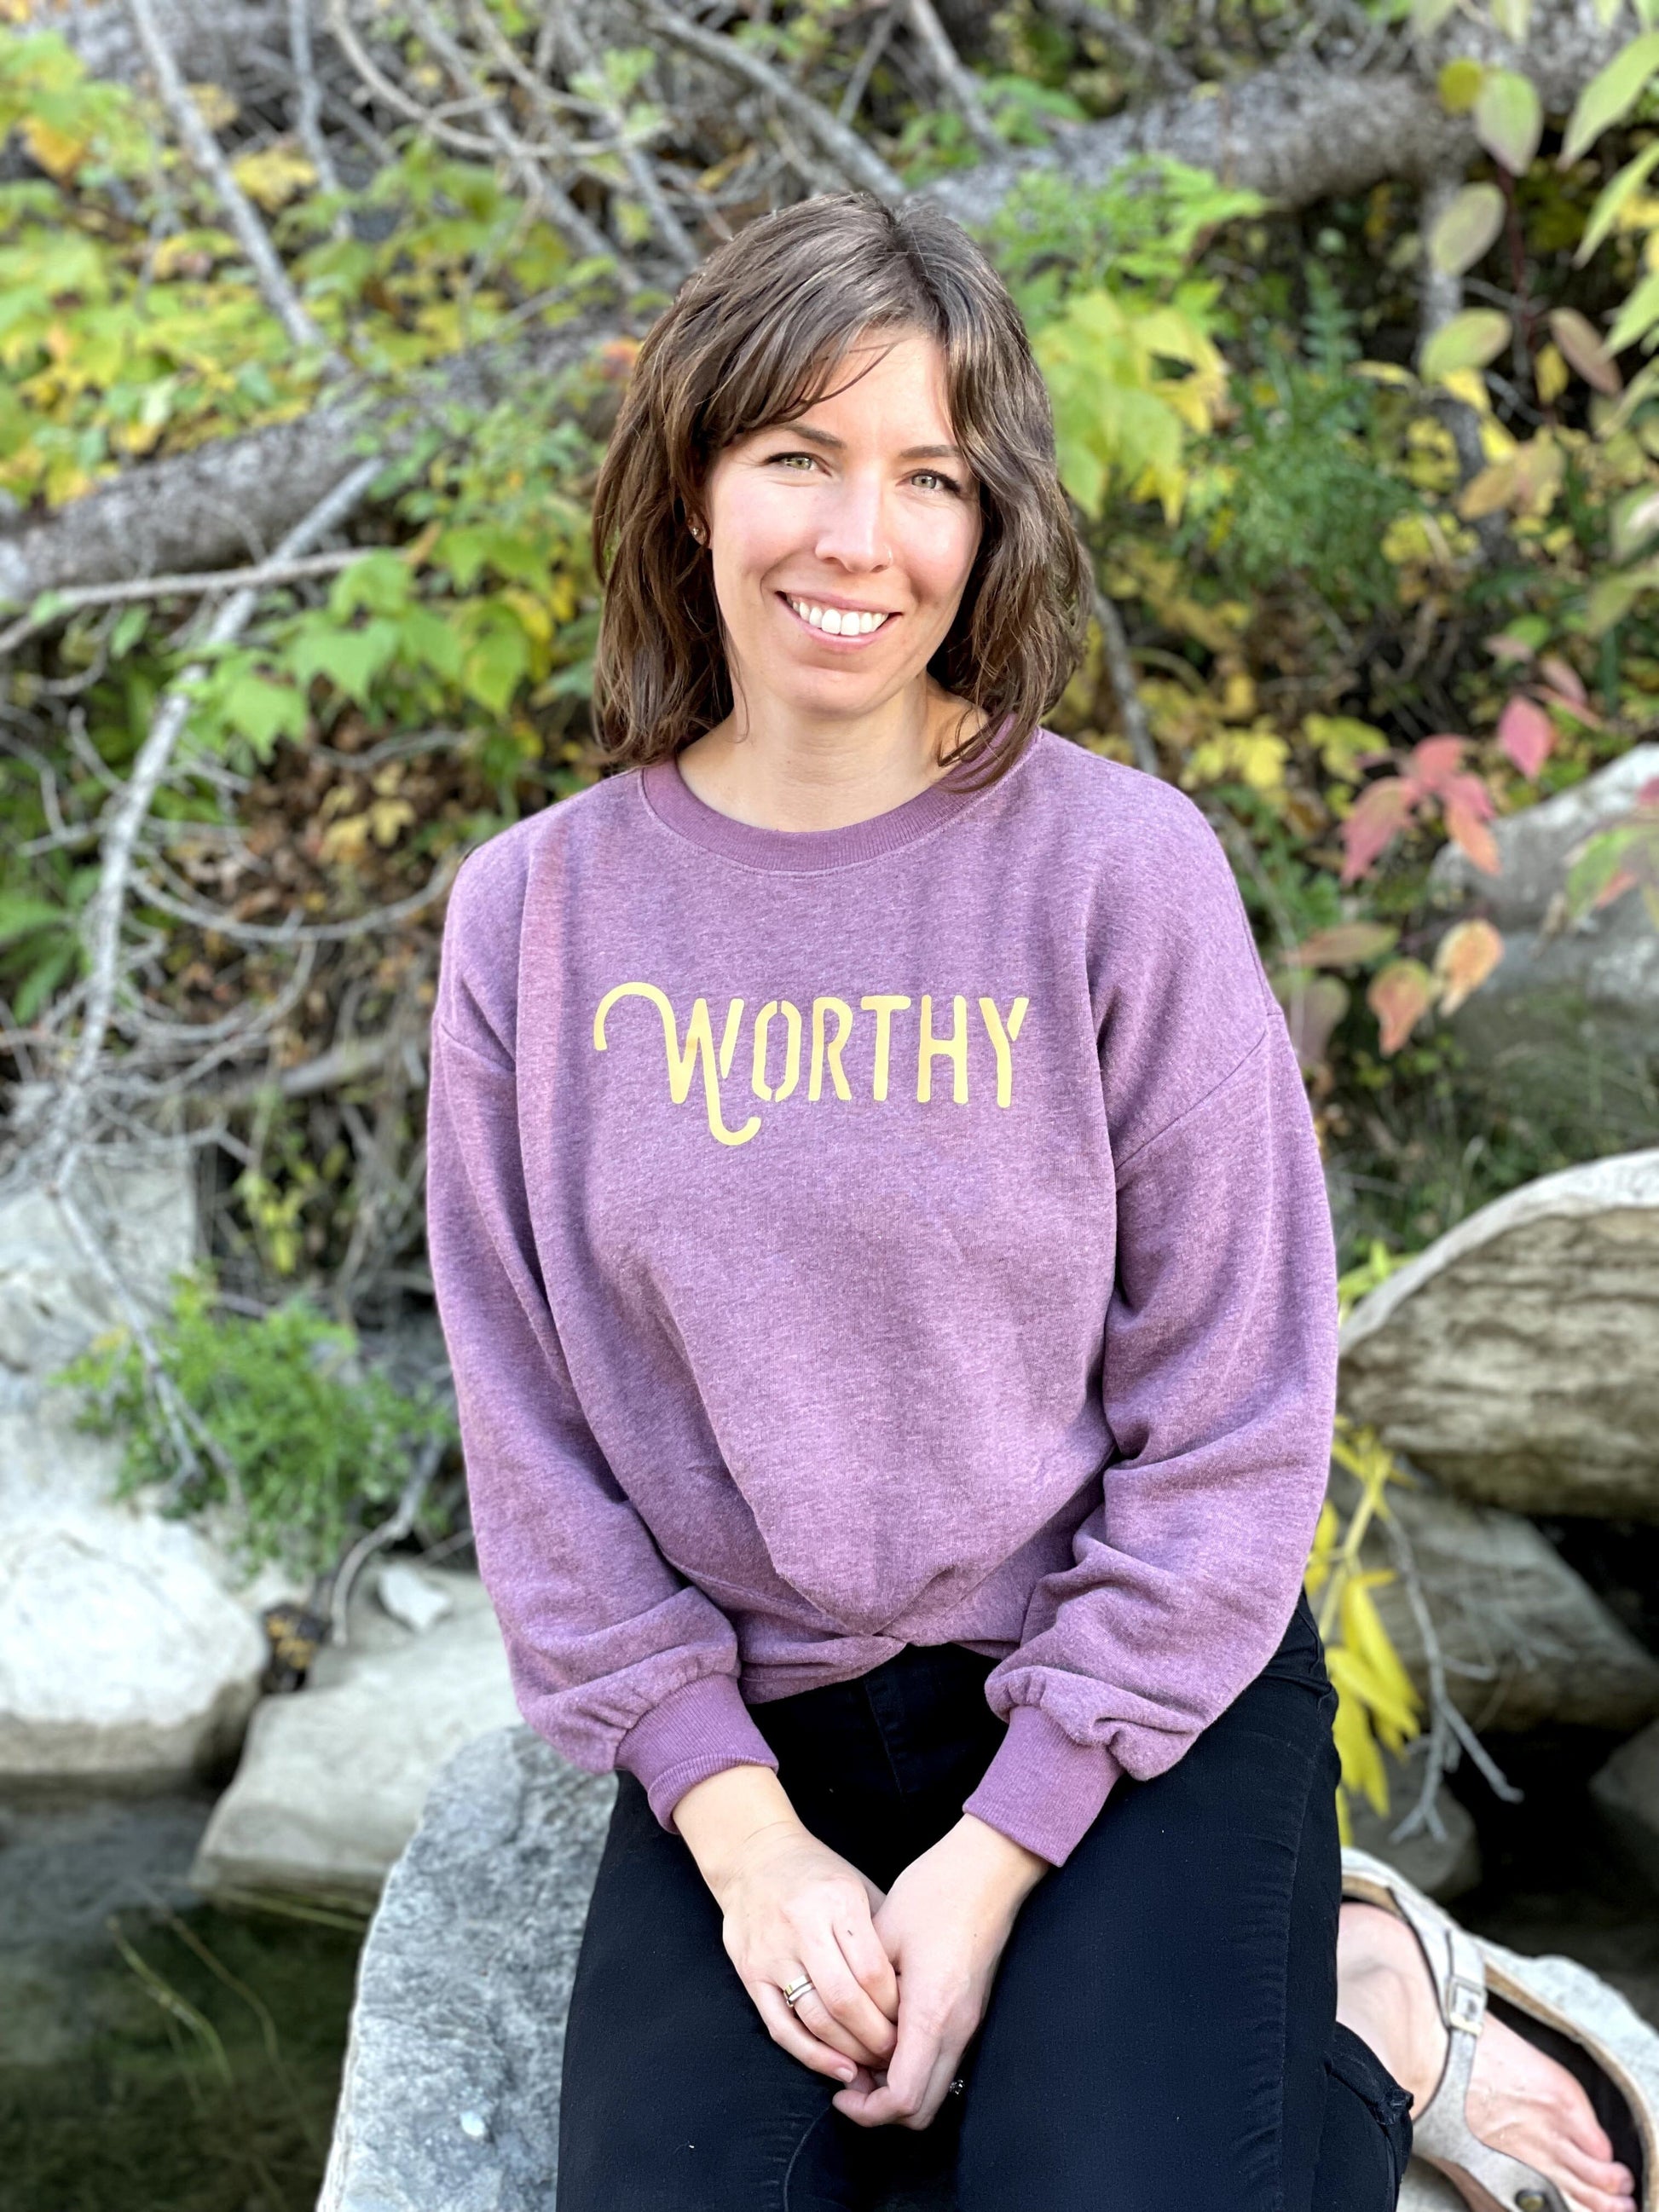 A woman sitting on a rock smiling into the camera wearing a dark pink heathered sweater with gold "WORTHY" lettering across the front.